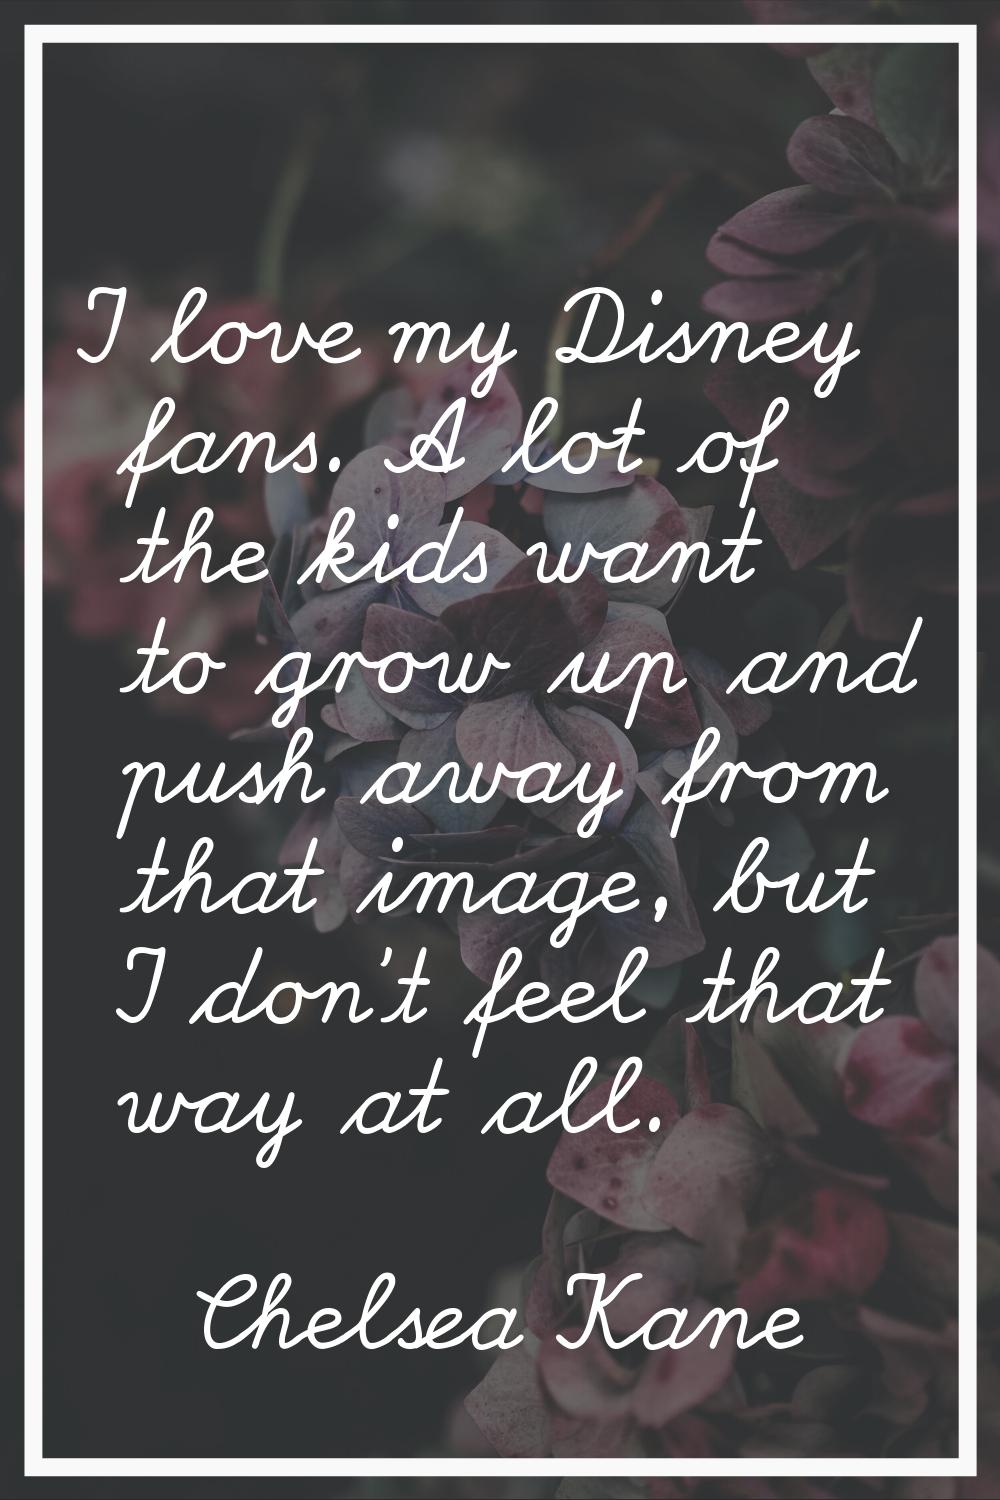 I love my Disney fans. A lot of the kids want to grow up and push away from that image, but I don't